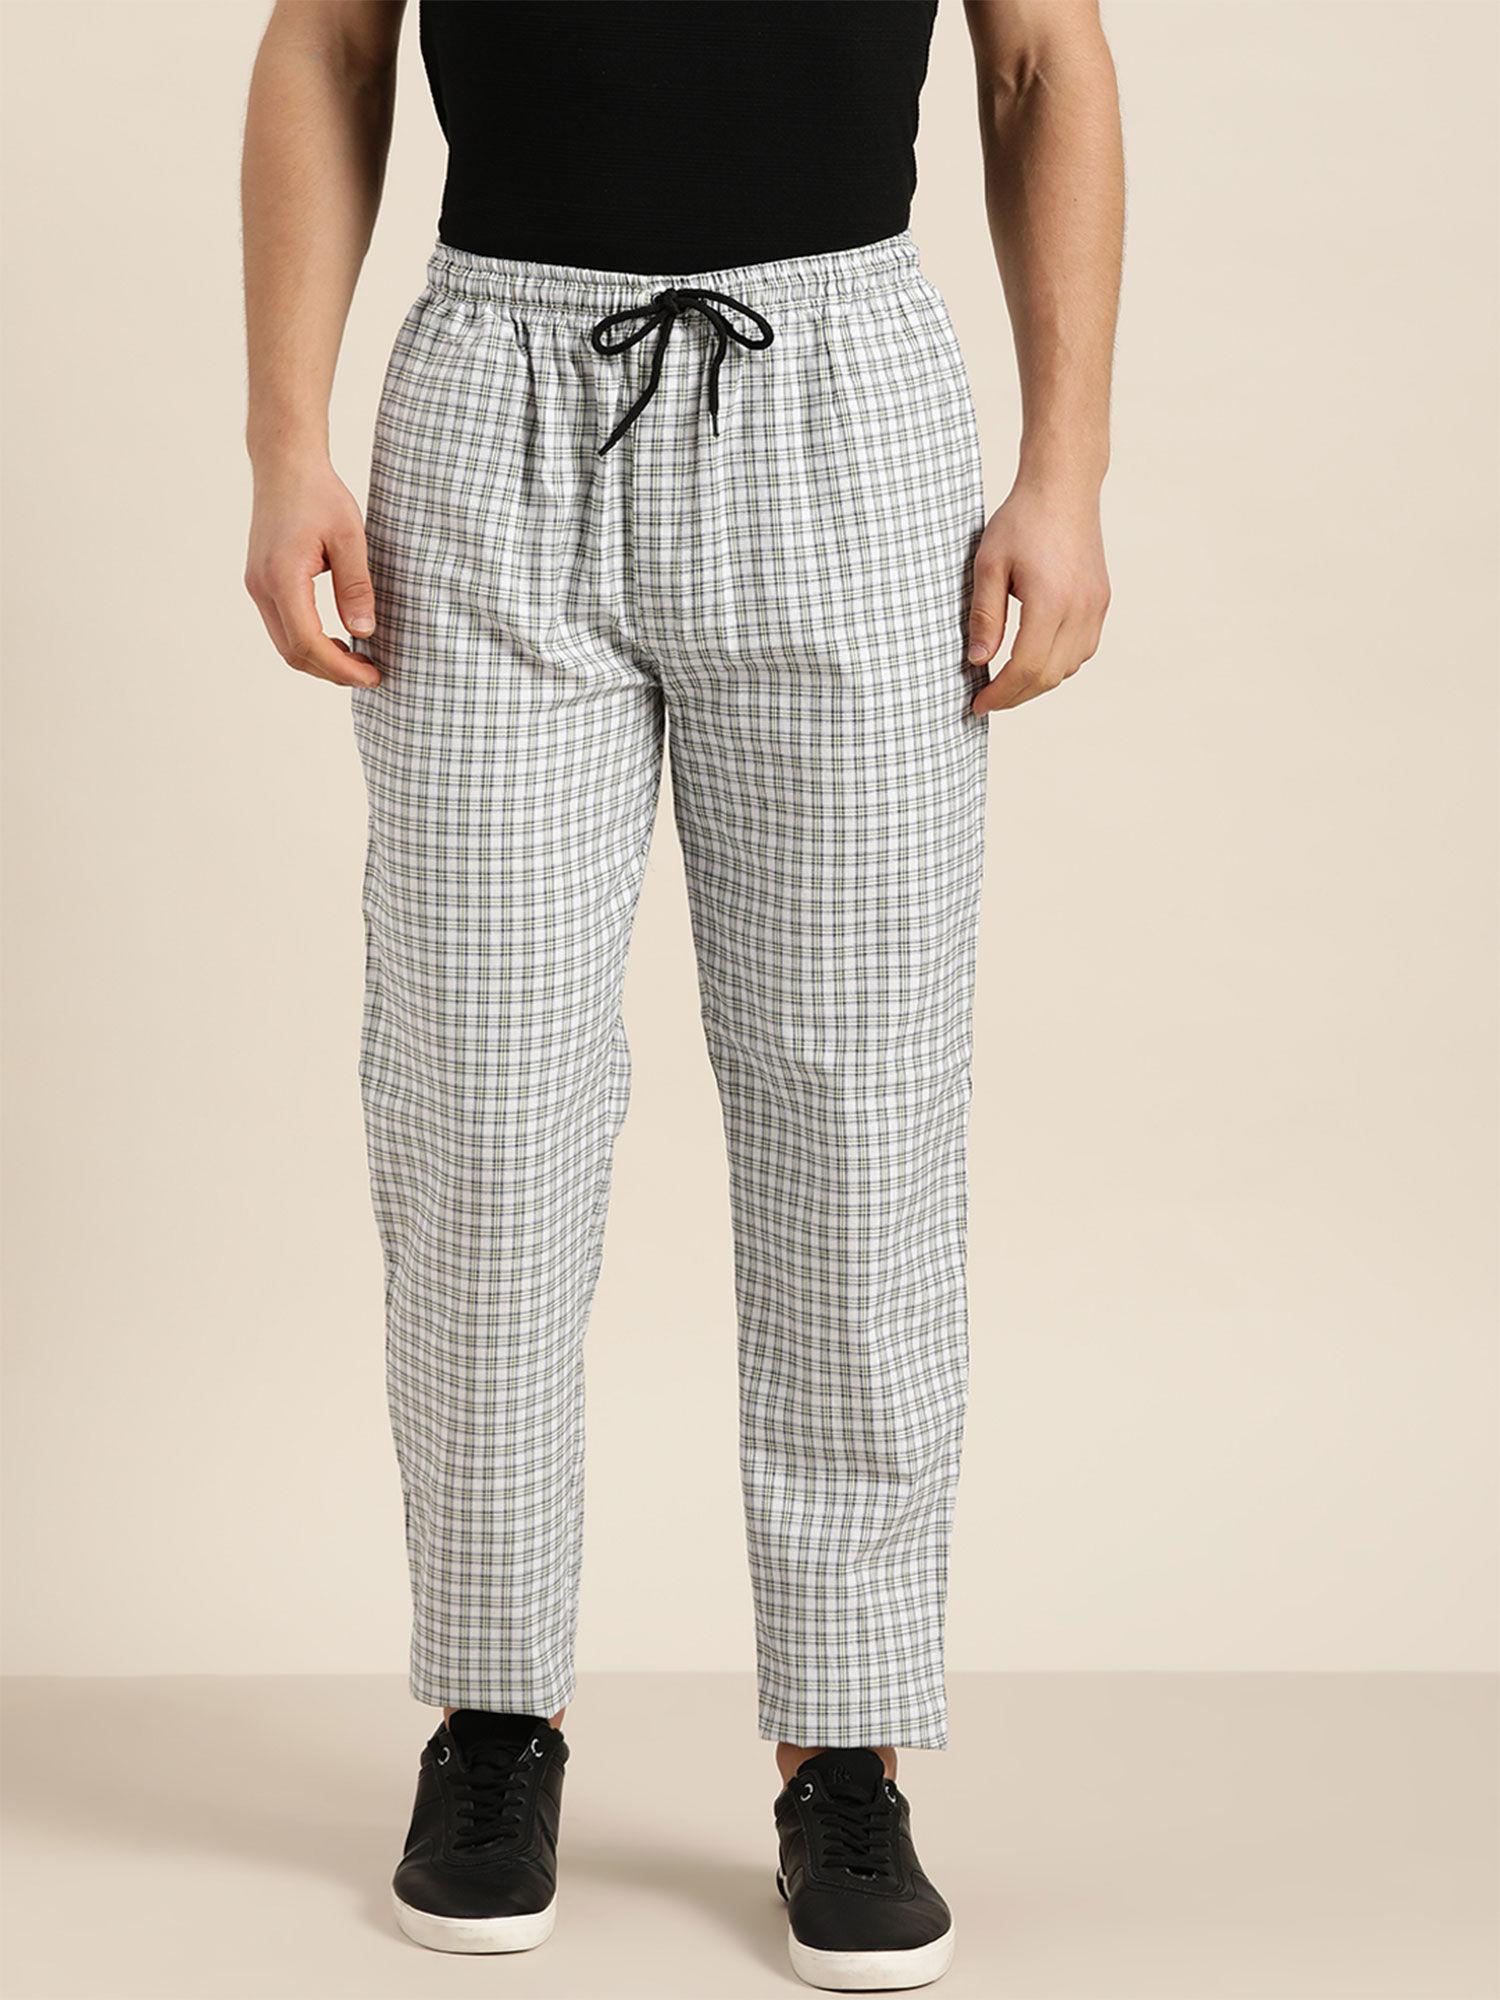 cotton green & white checked track pant